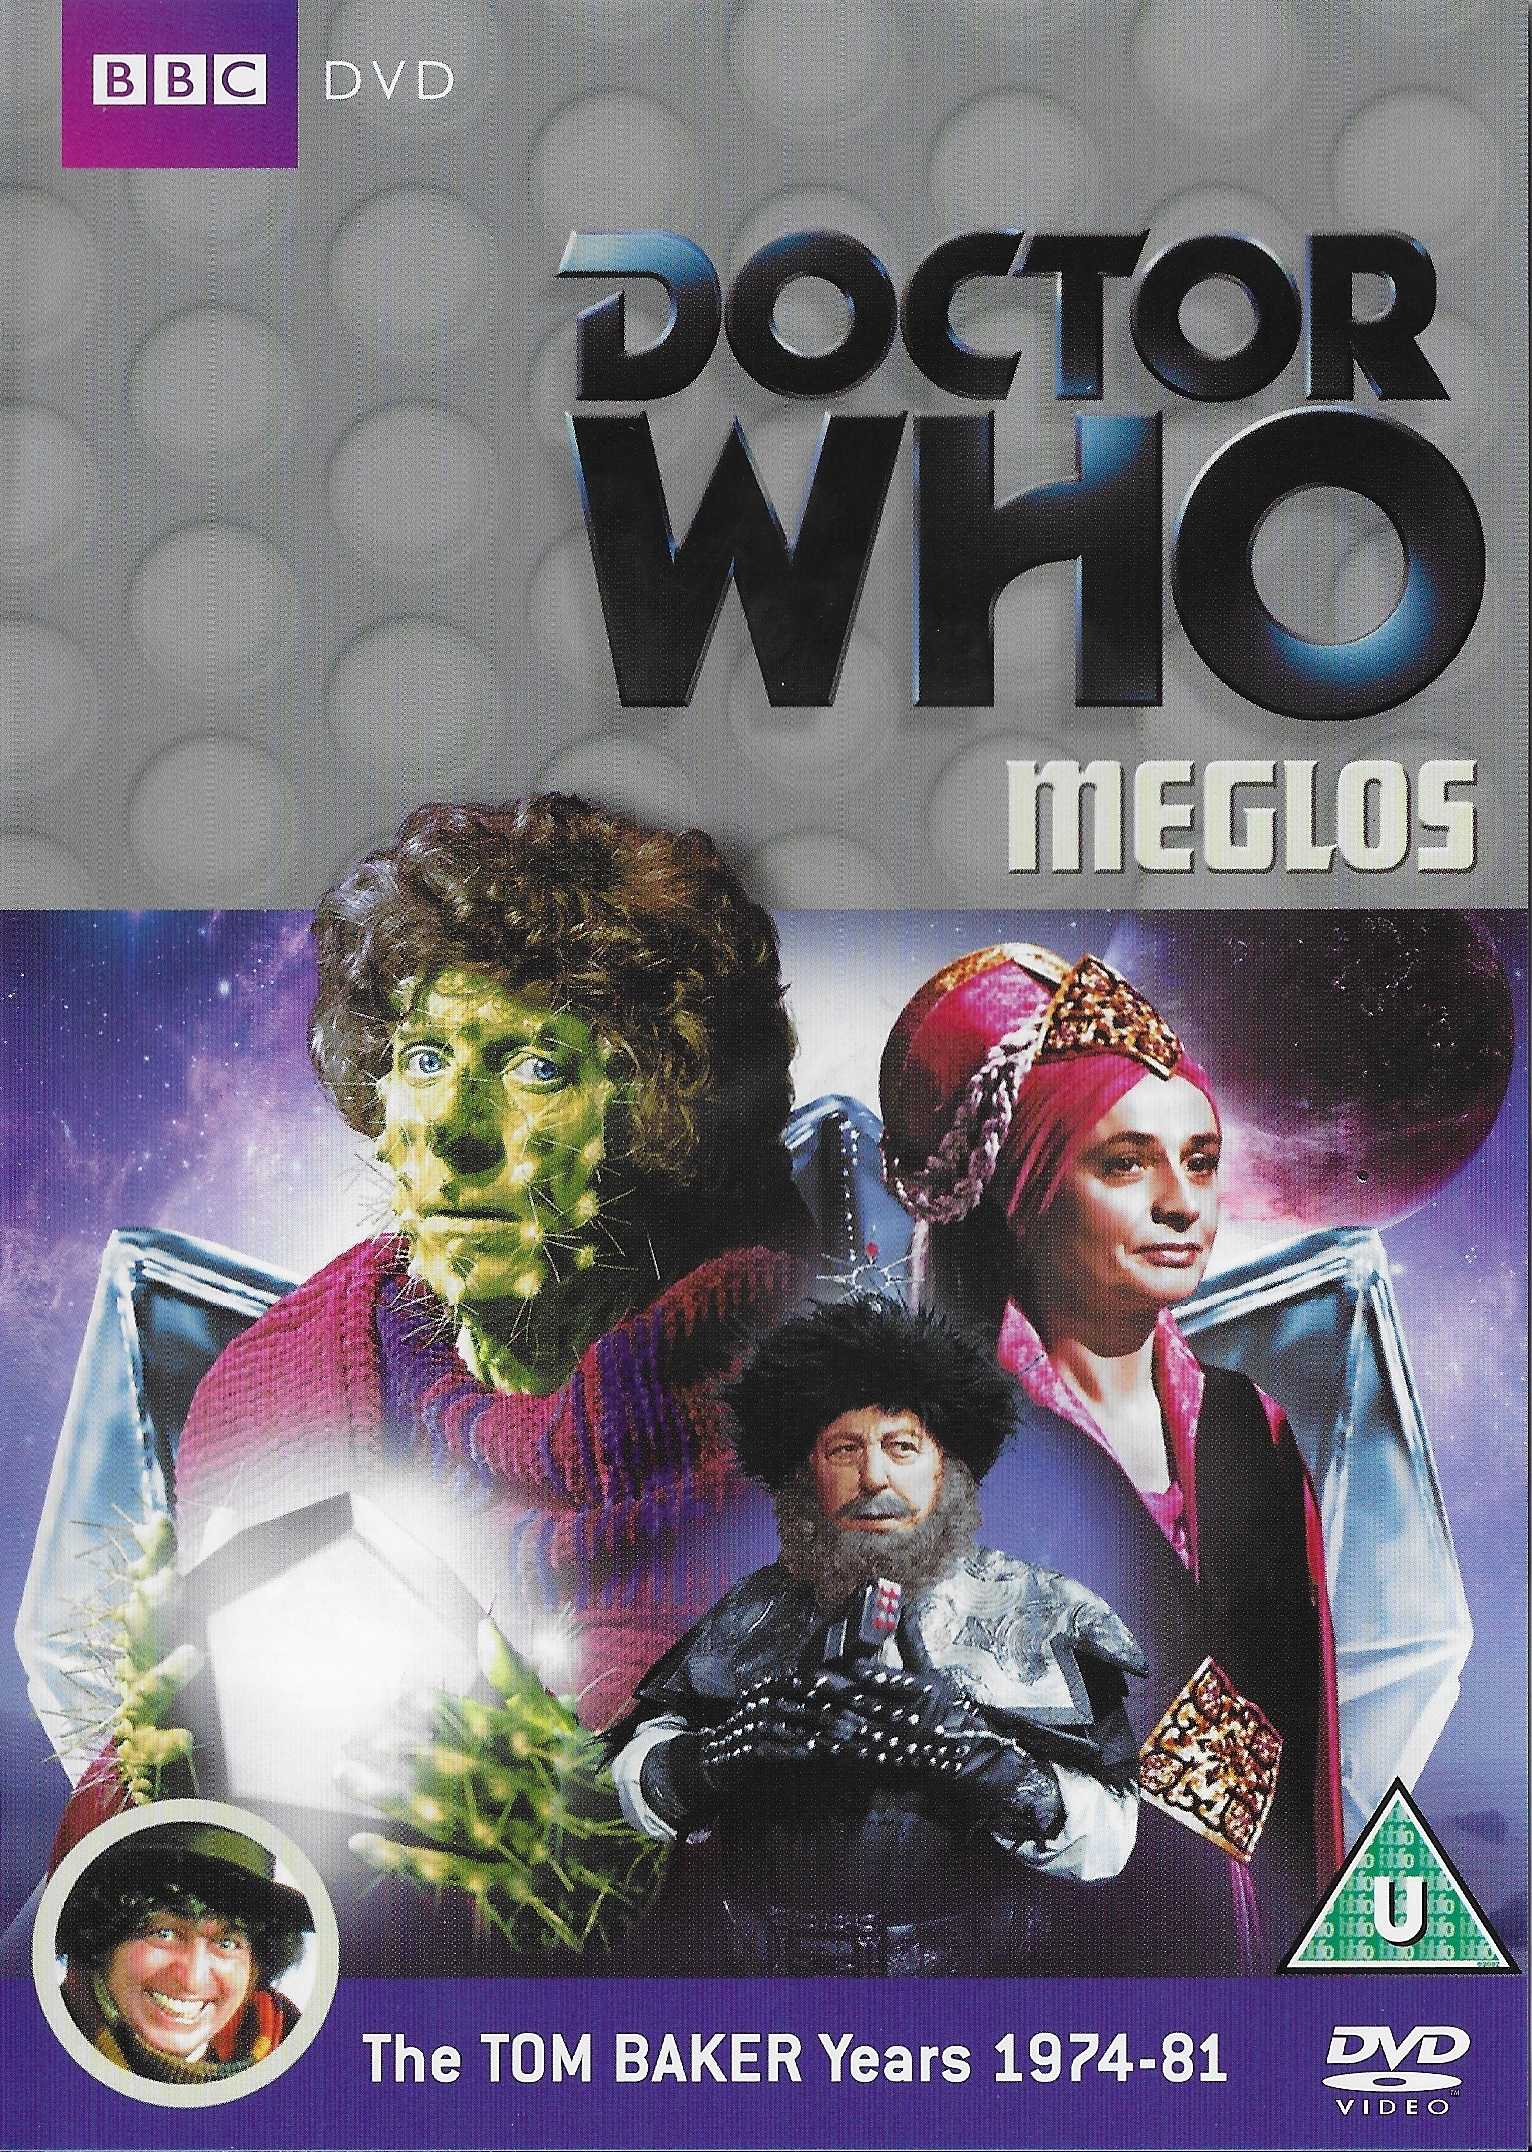 Picture of BBCDVD 2852 Doctor Who - Meglos by artist John Flanagan / Andrew McCulloch from the BBC dvds - Records and Tapes library